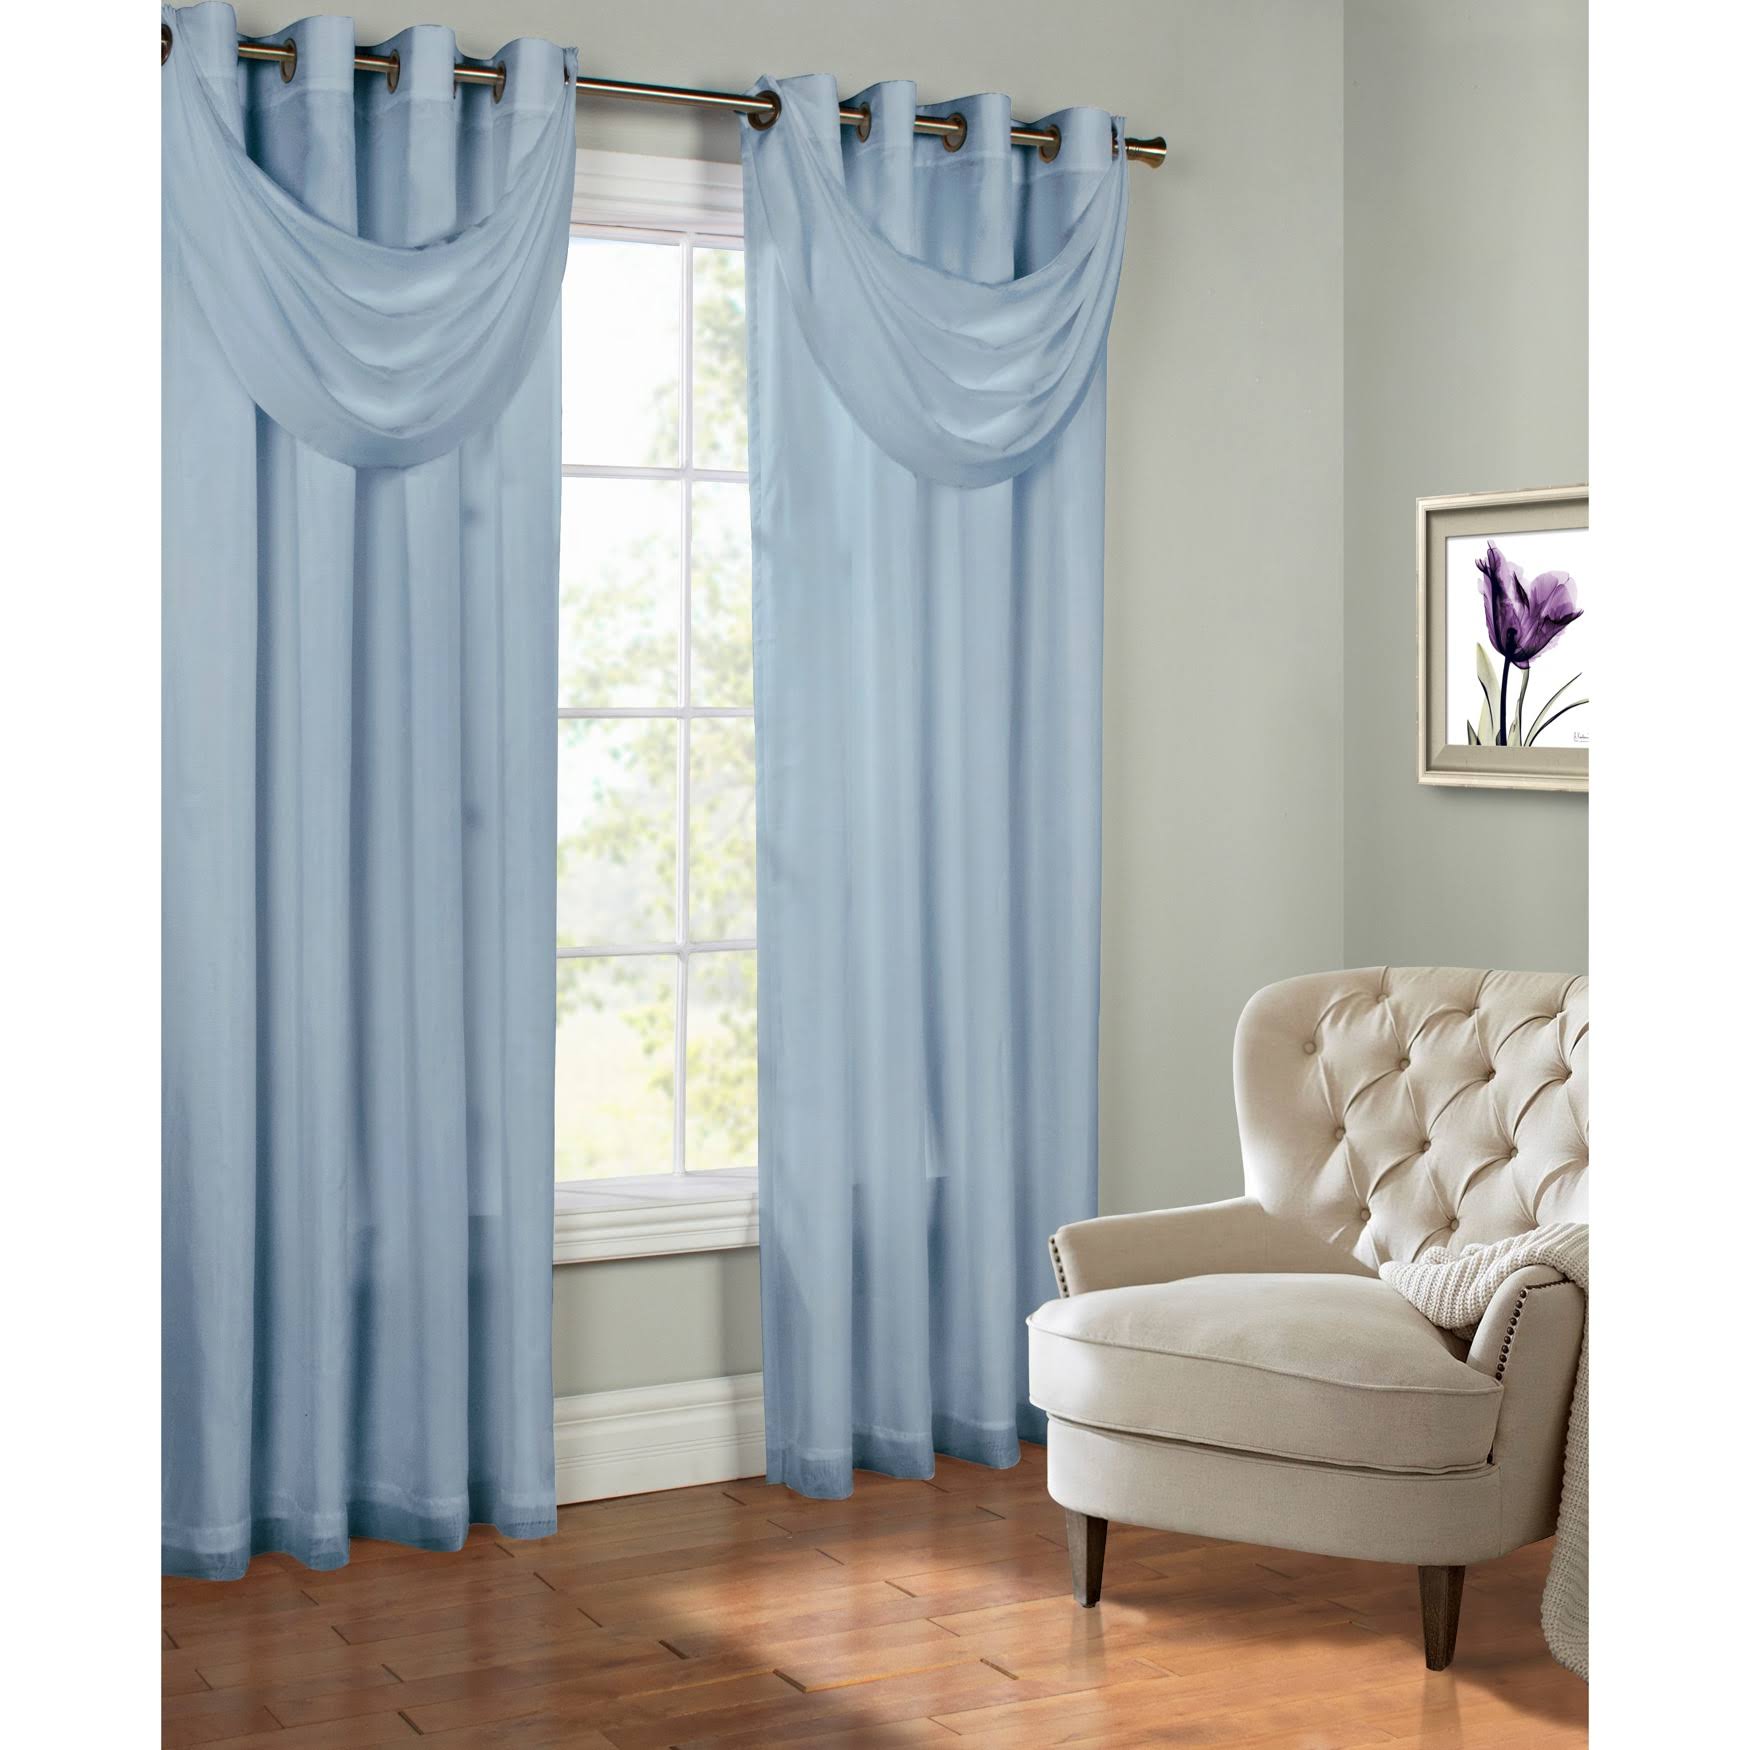 Commonwealth Rhapsody Lined Solid Sheer Grommet Curtain Panel | Decor